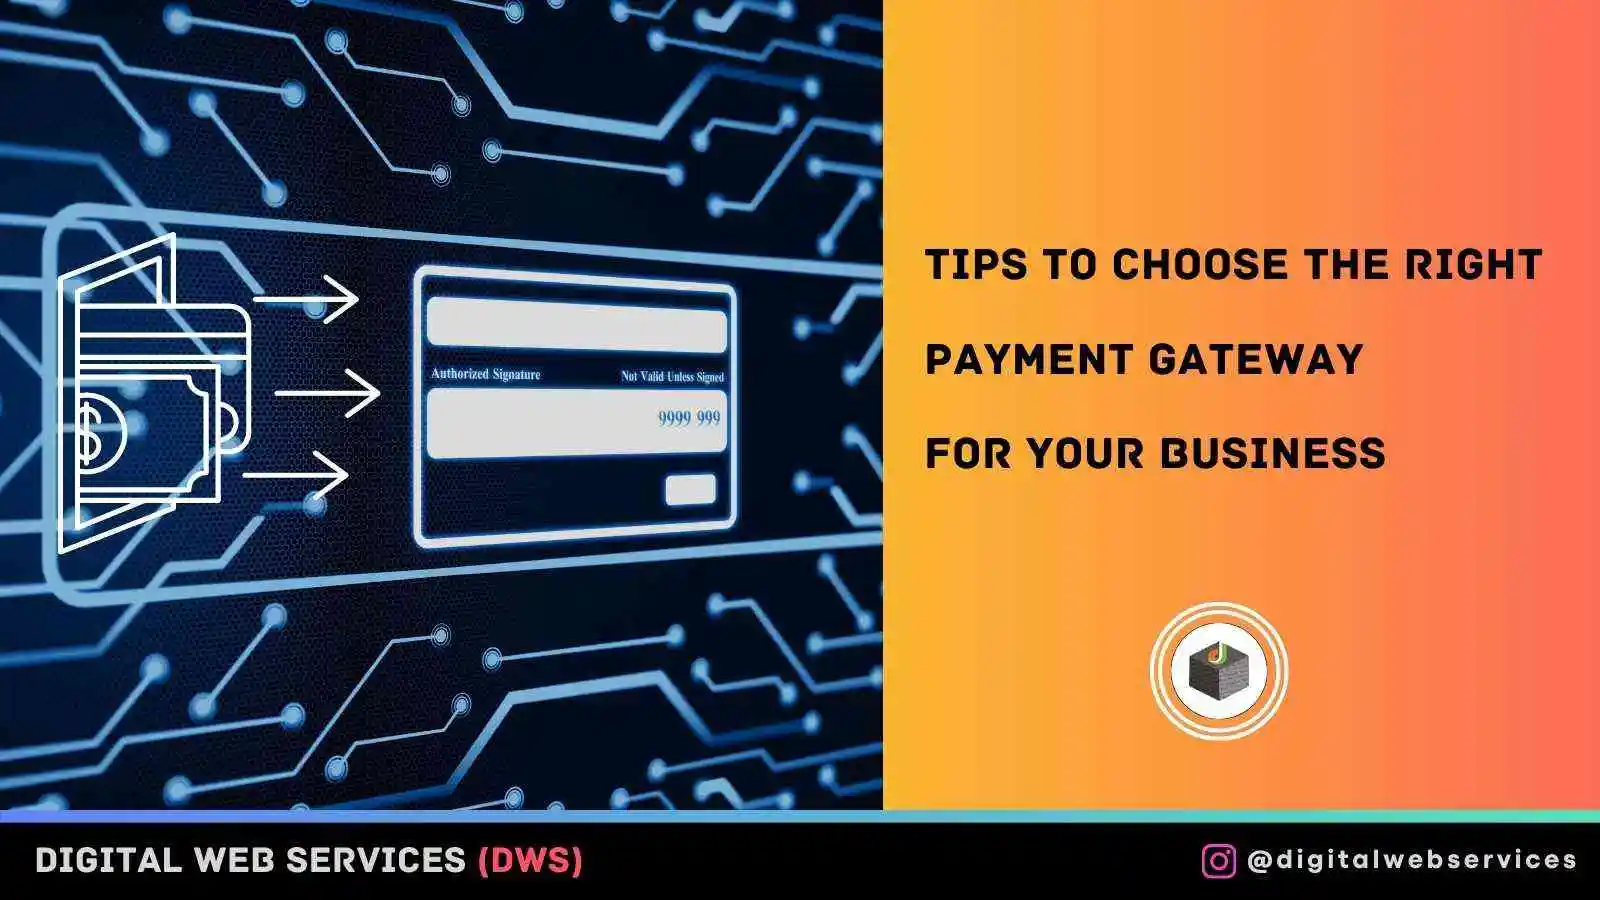 Tips to Choose the Right Payment Gateway for Your Business